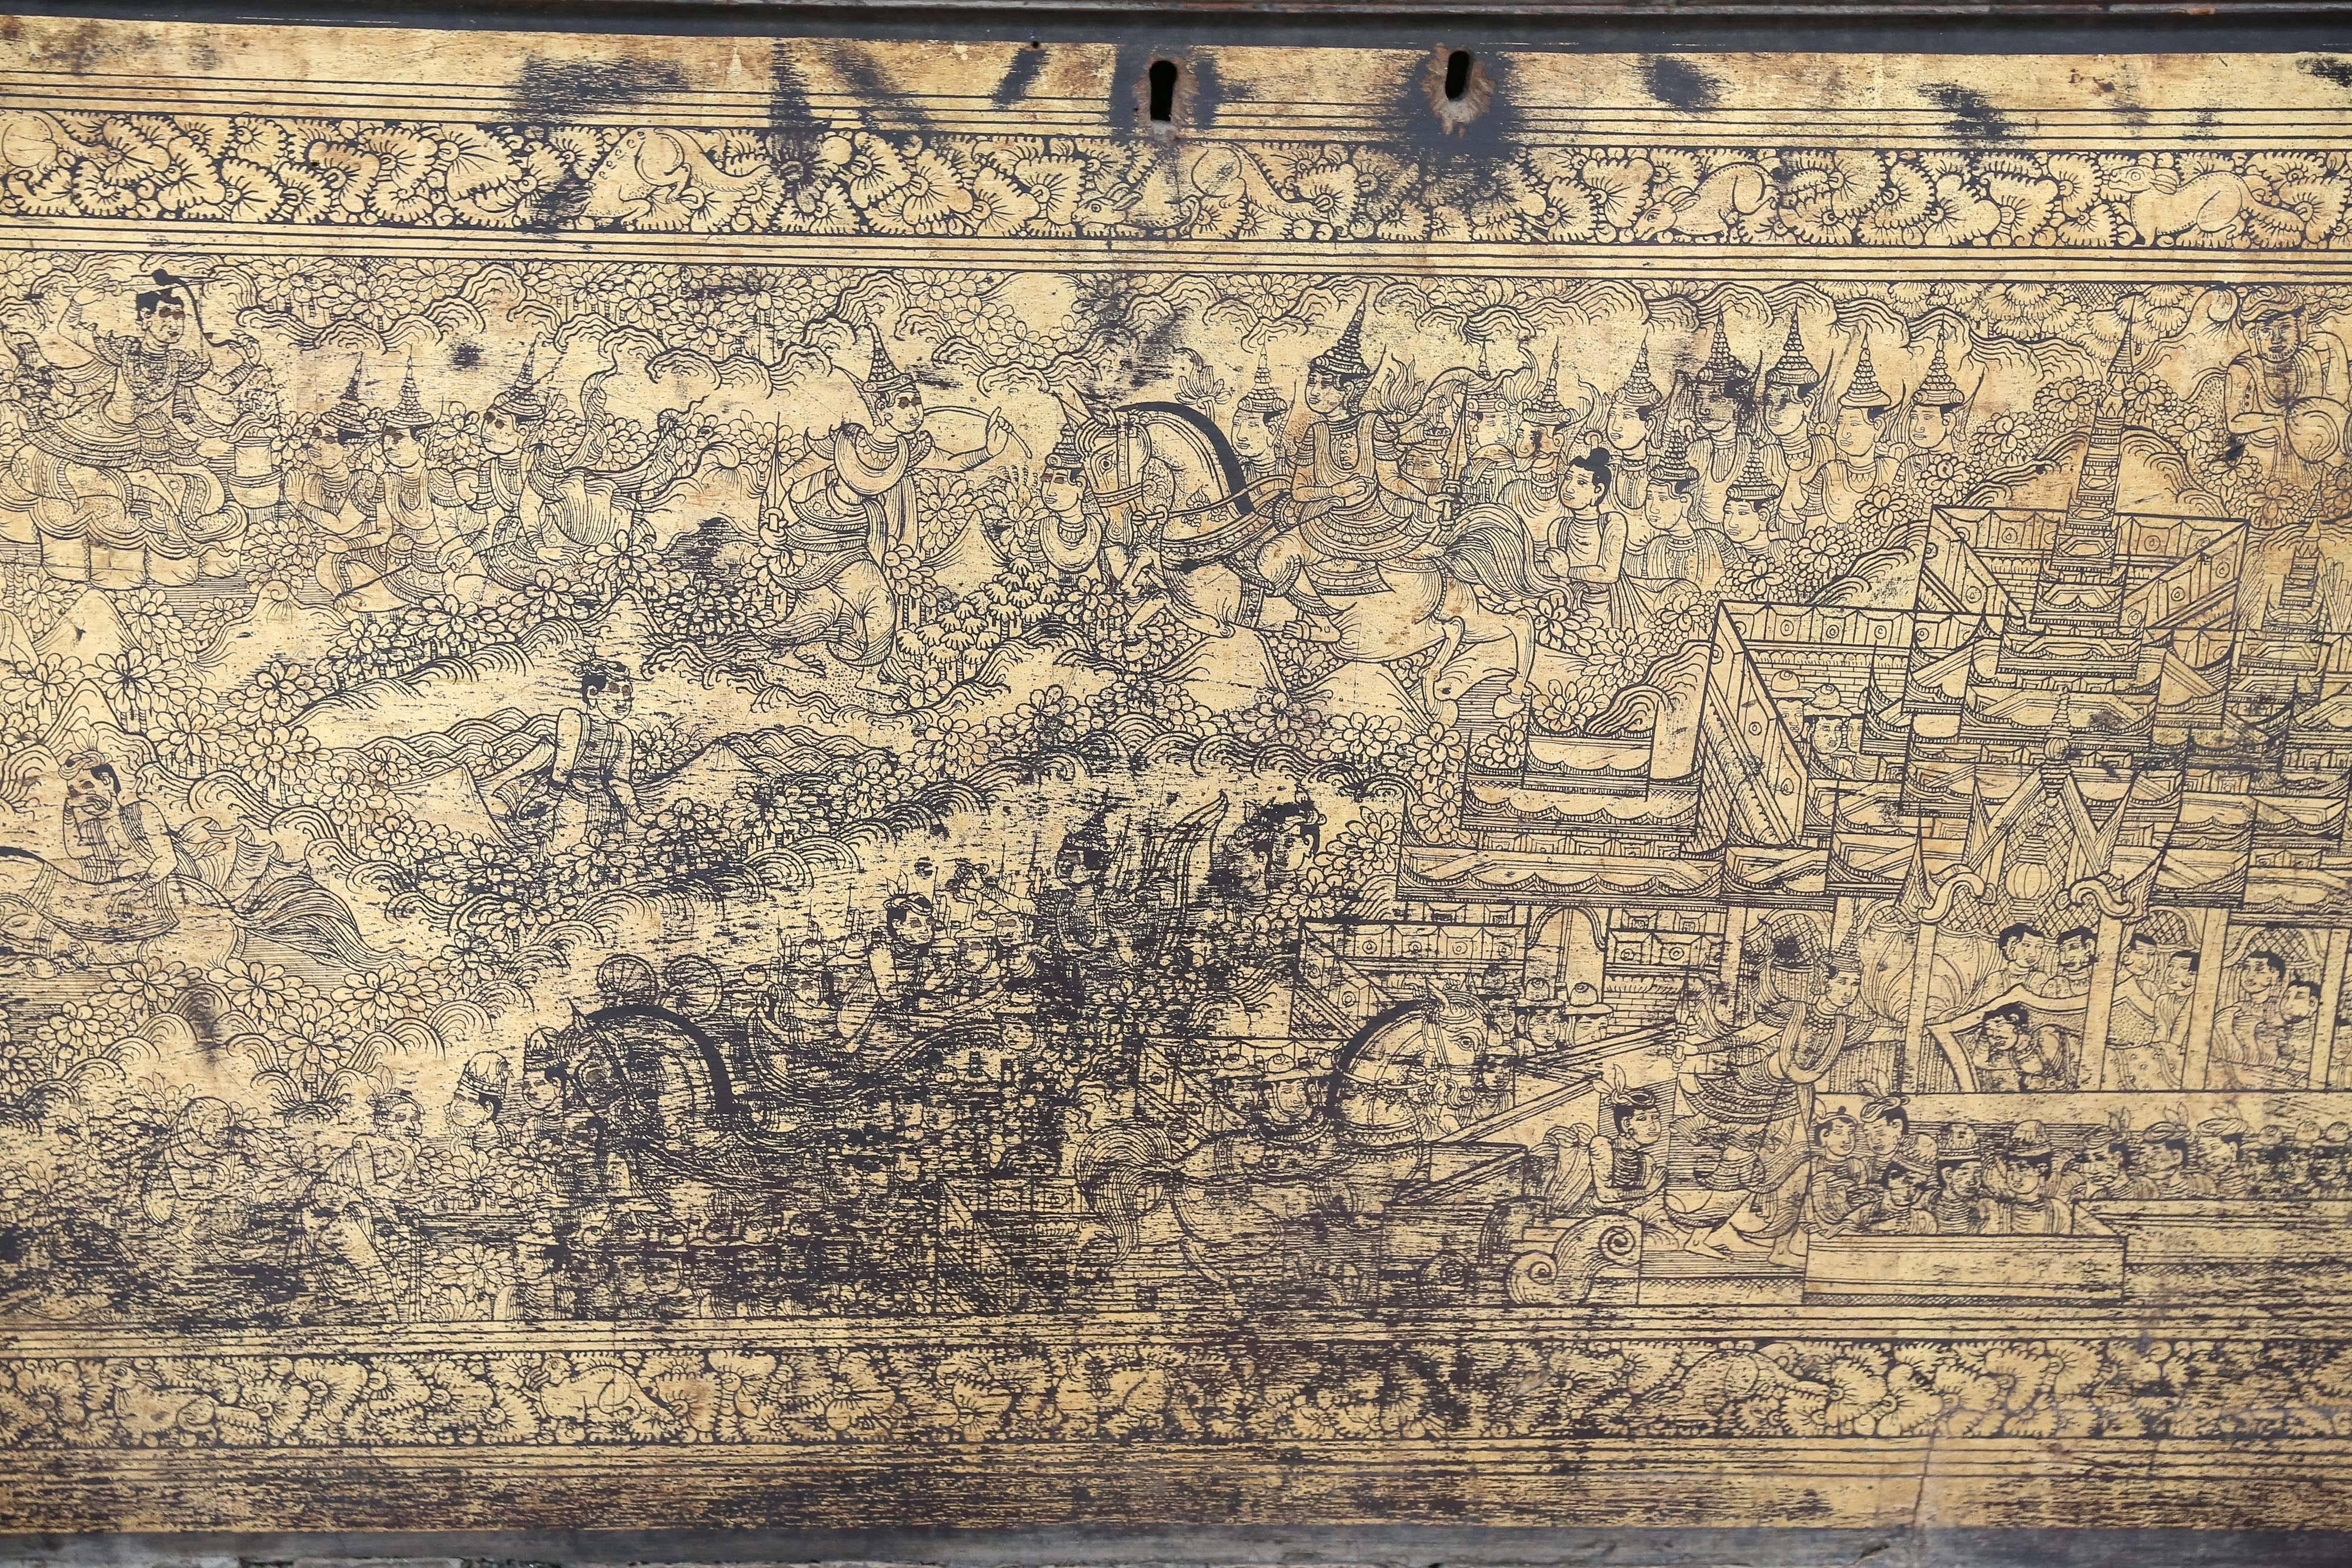 A true treasure uncovered in Southeast Asia, this trunk dates back 200 years and is originally from Burma (modern day Myanmar). Exquisitely parcel gilt and hand-painted in gold with images from Burmese Buddhist culture.

Dimensions: 22 in. Height